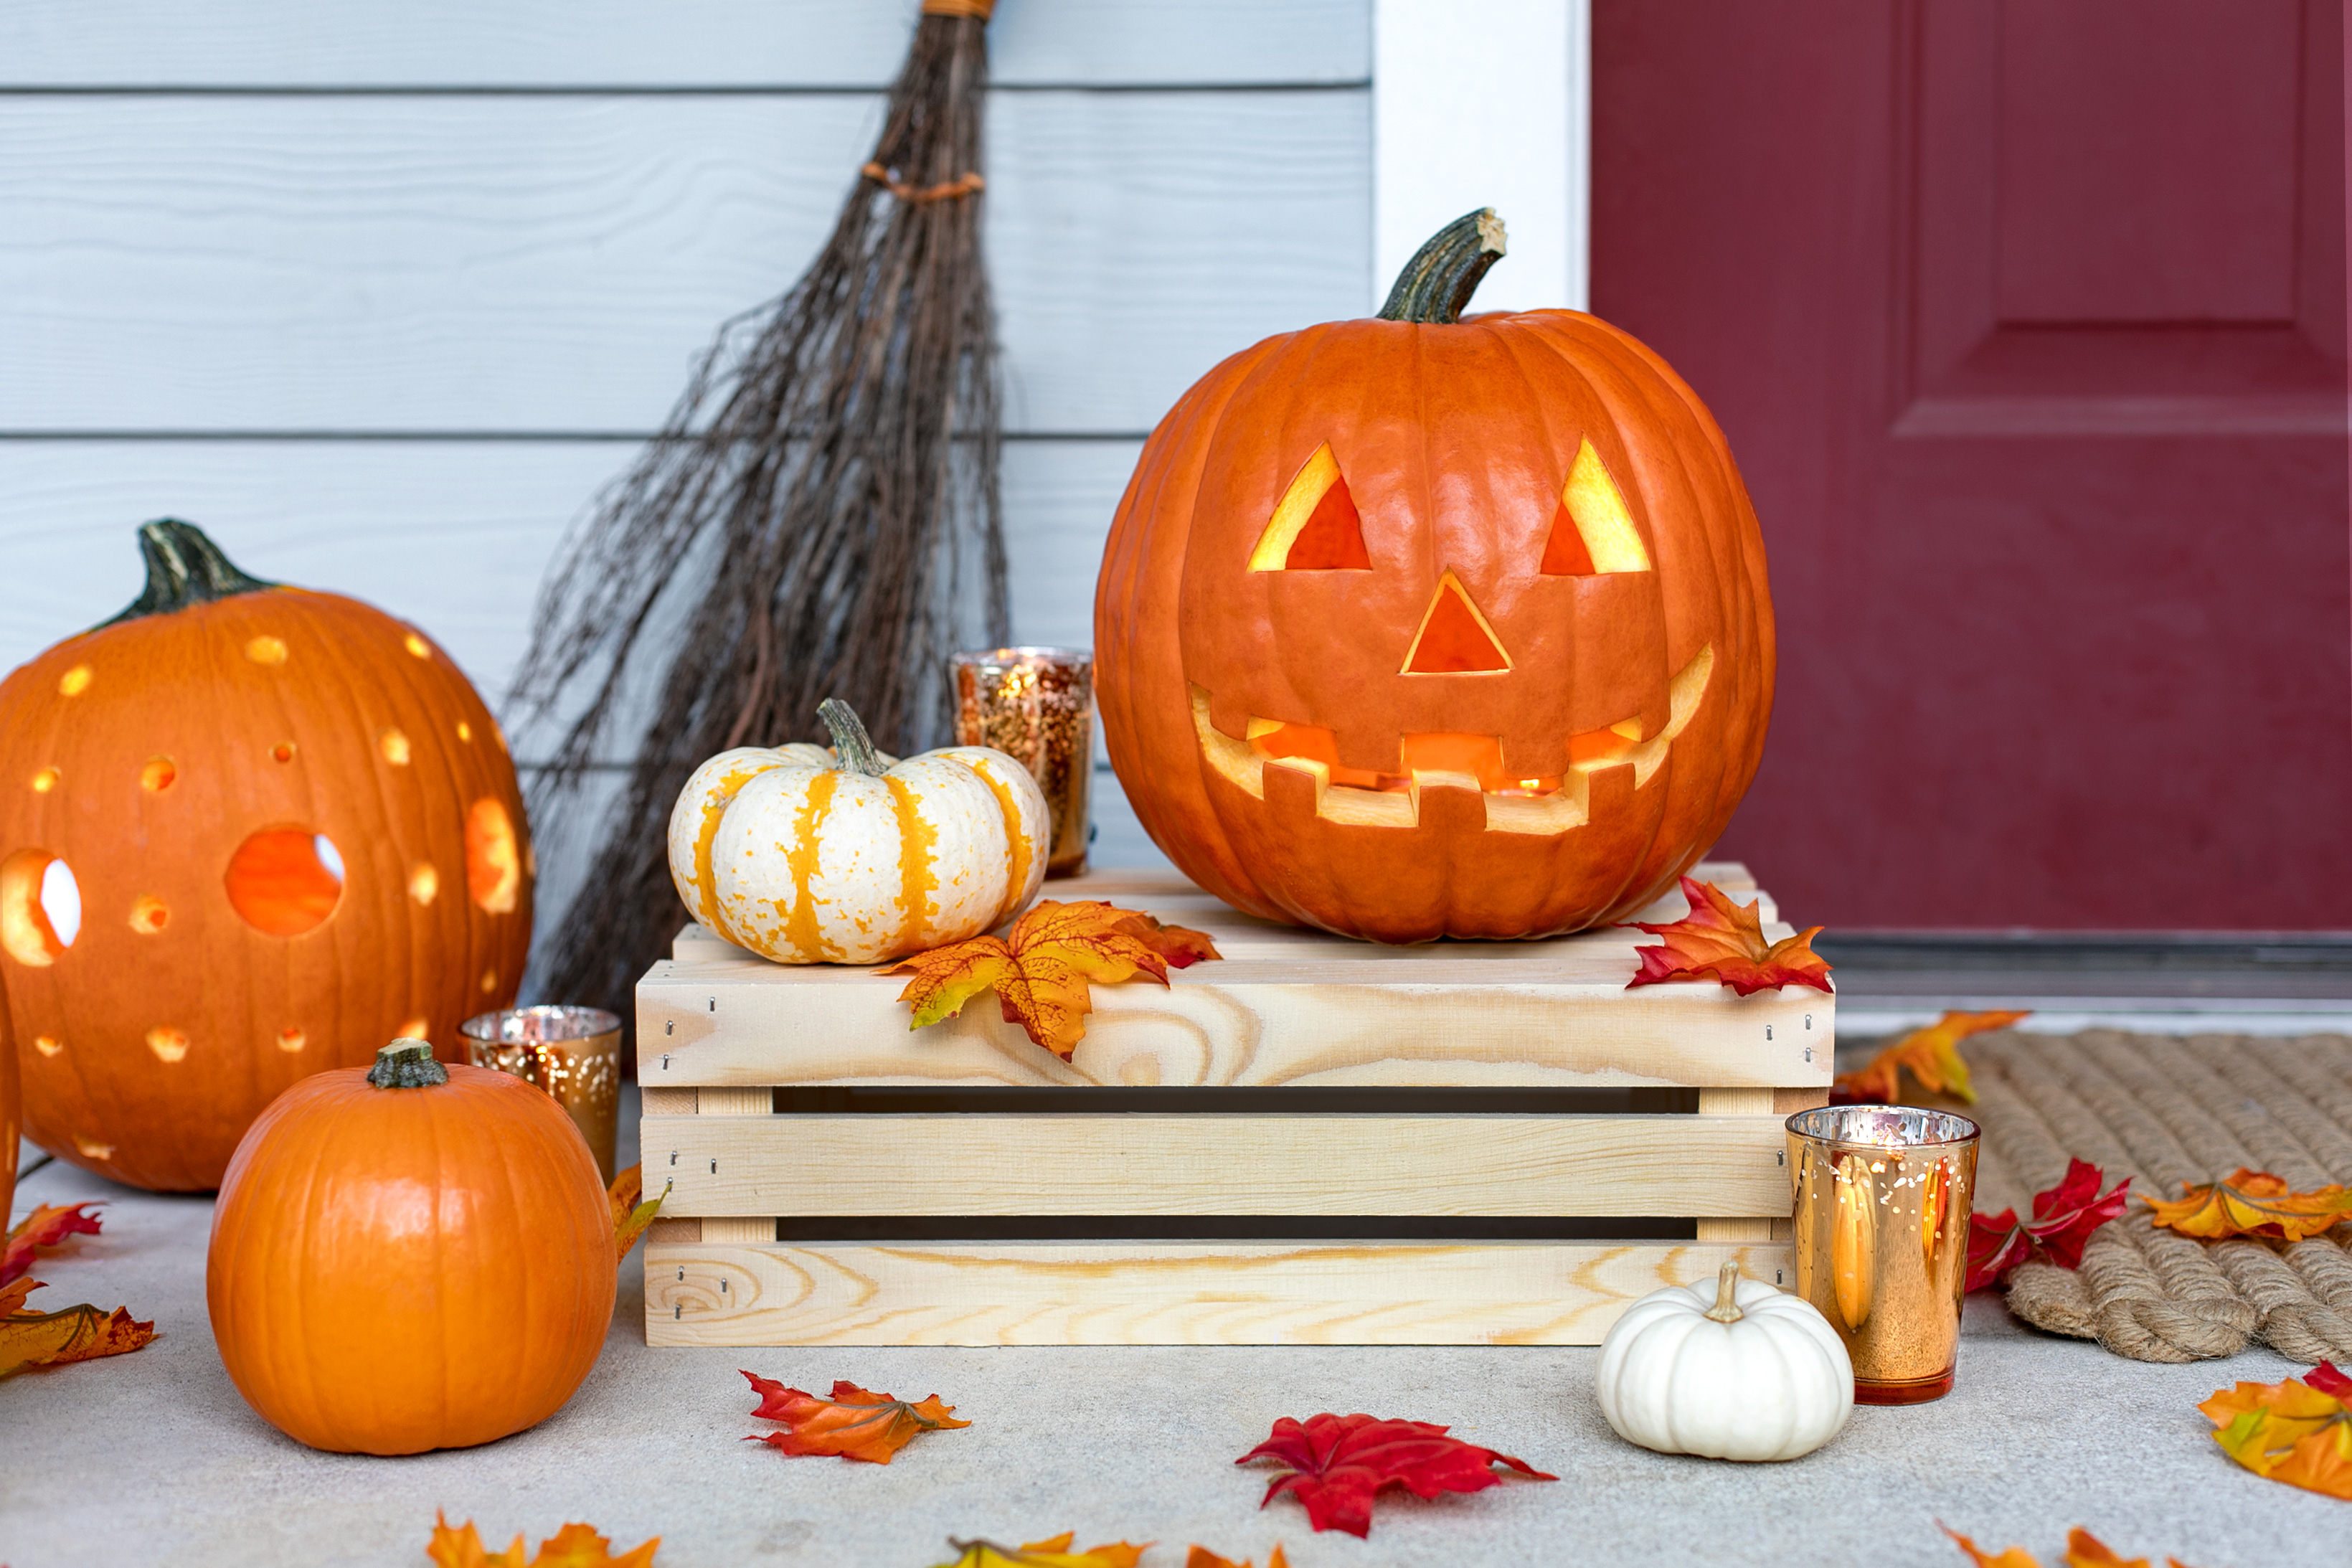 30-pumpkin-carving-ideas-you-will-absolutely-love-crafts-on-fire